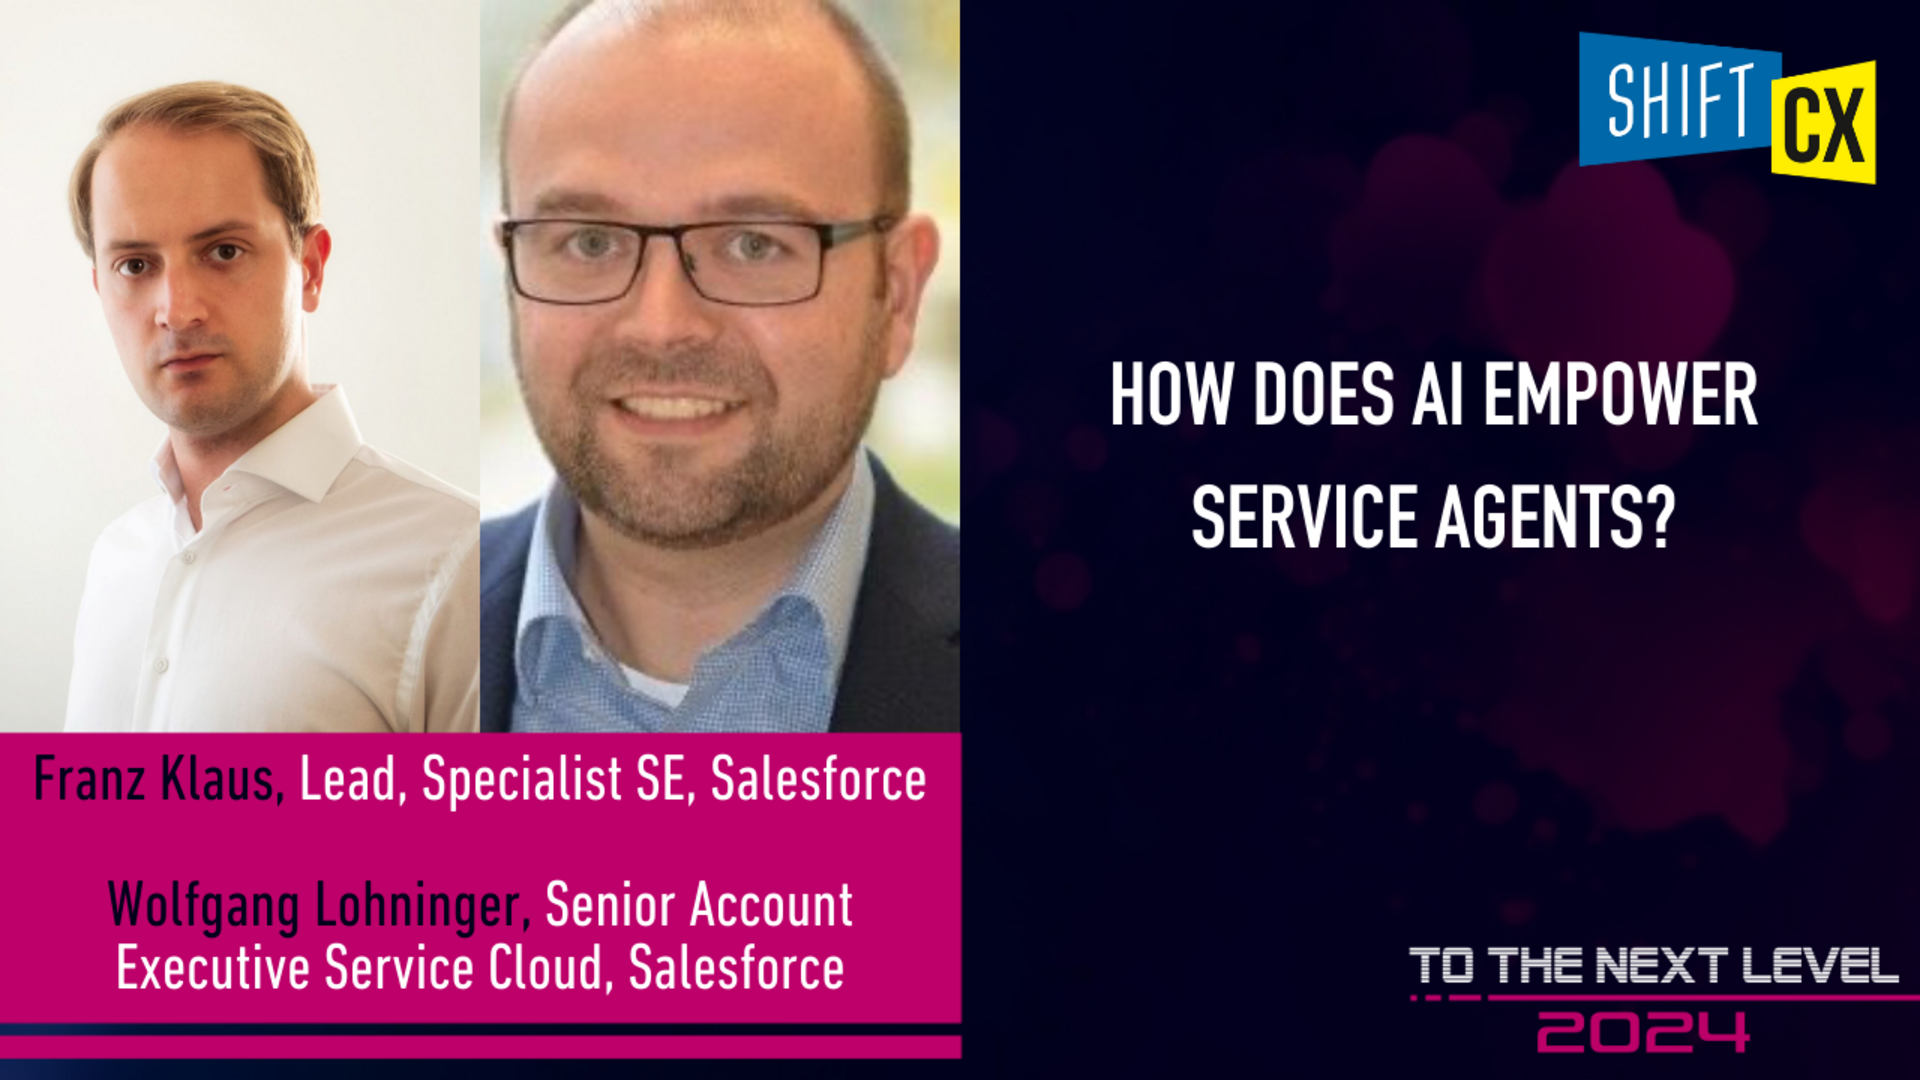 How Does AI Empower Service Agents?